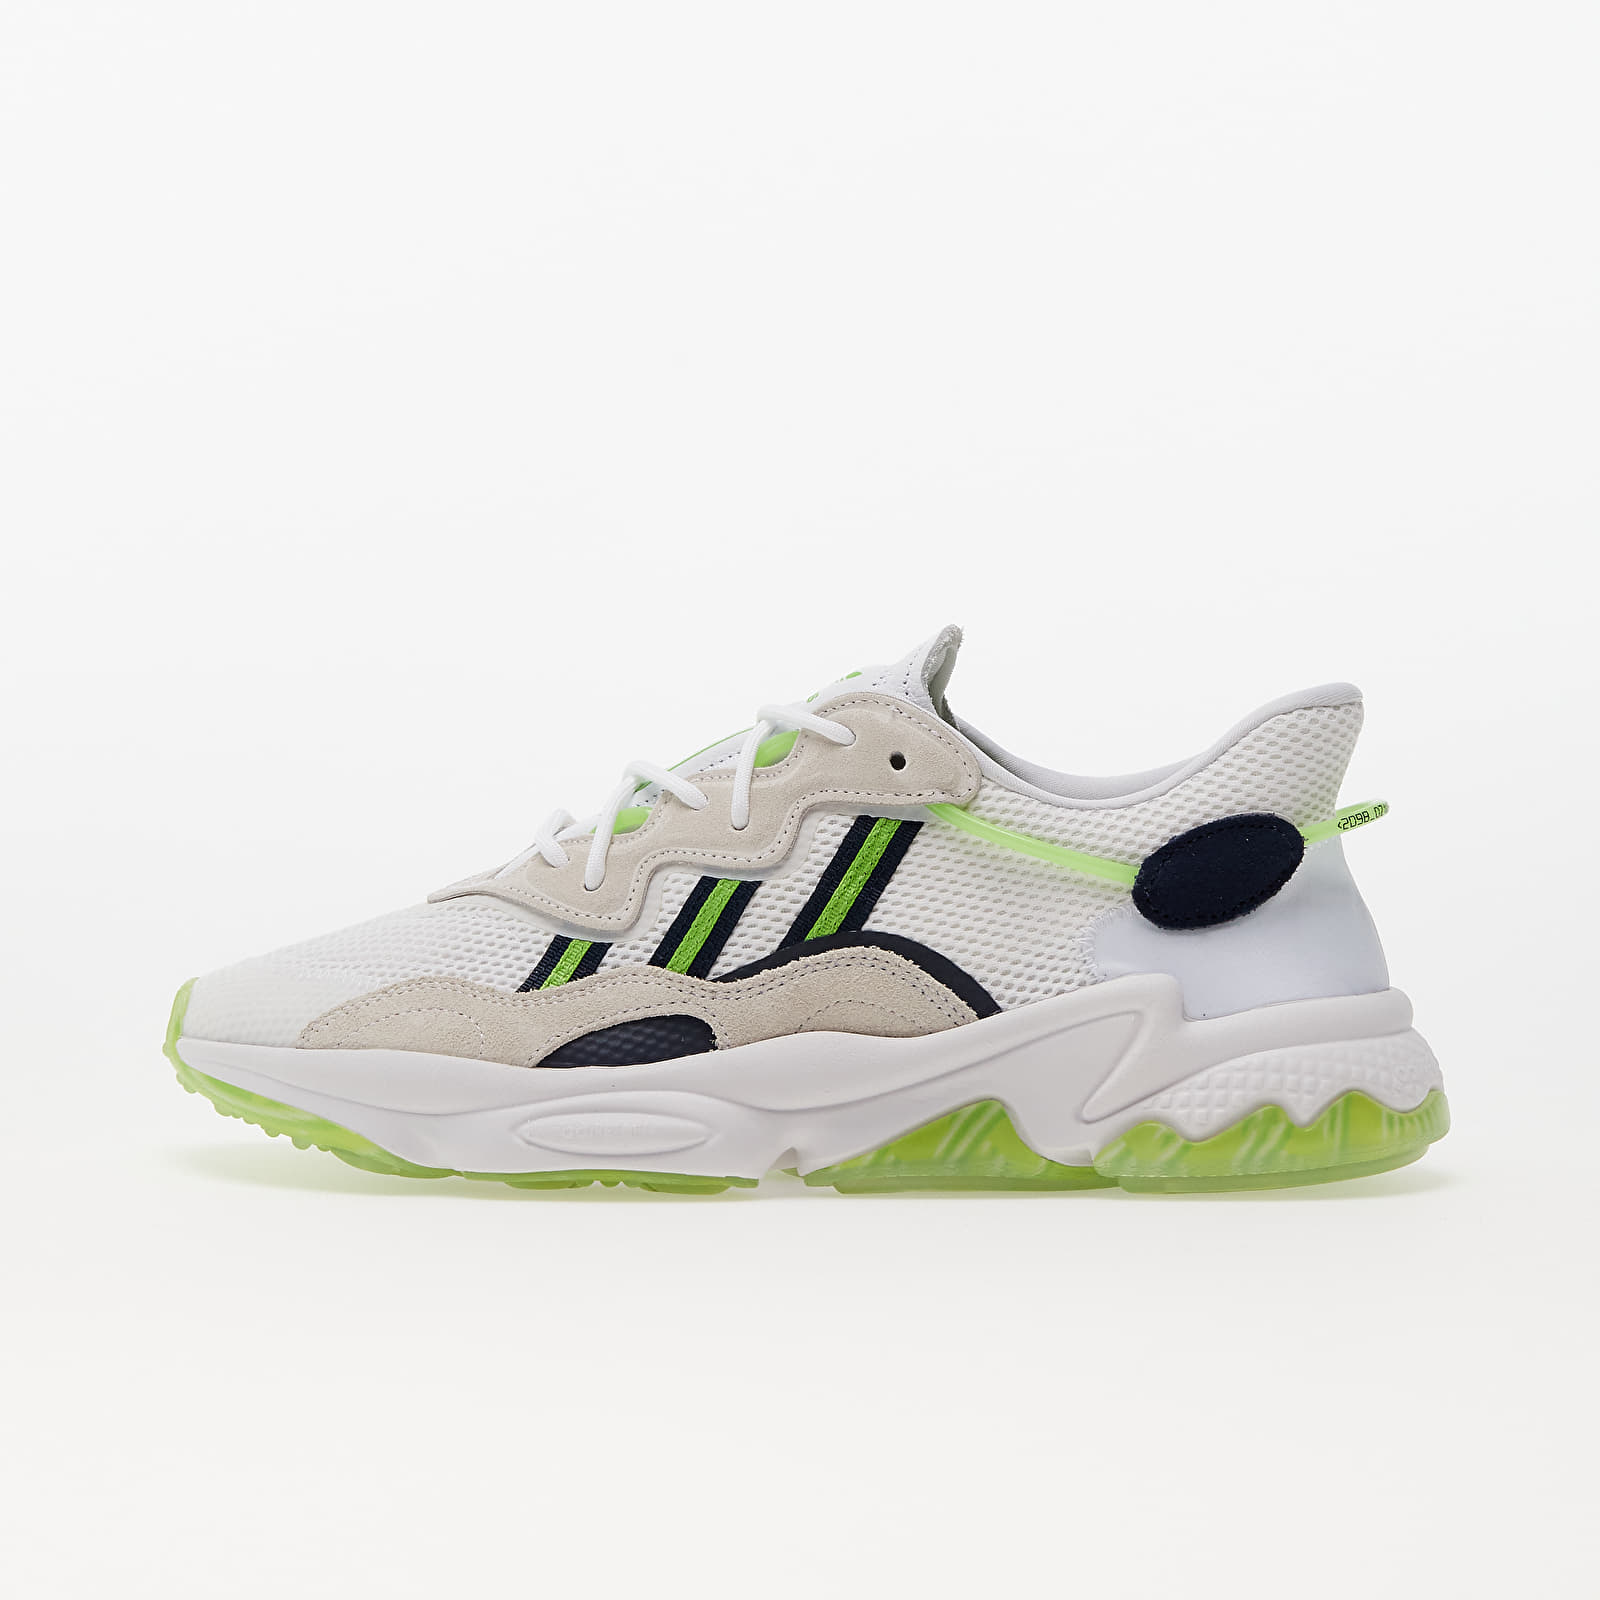 Zapatillas Hombre adidas Ozweego Manchester United Ftw White/ Legend Ink/ Team Semi Green